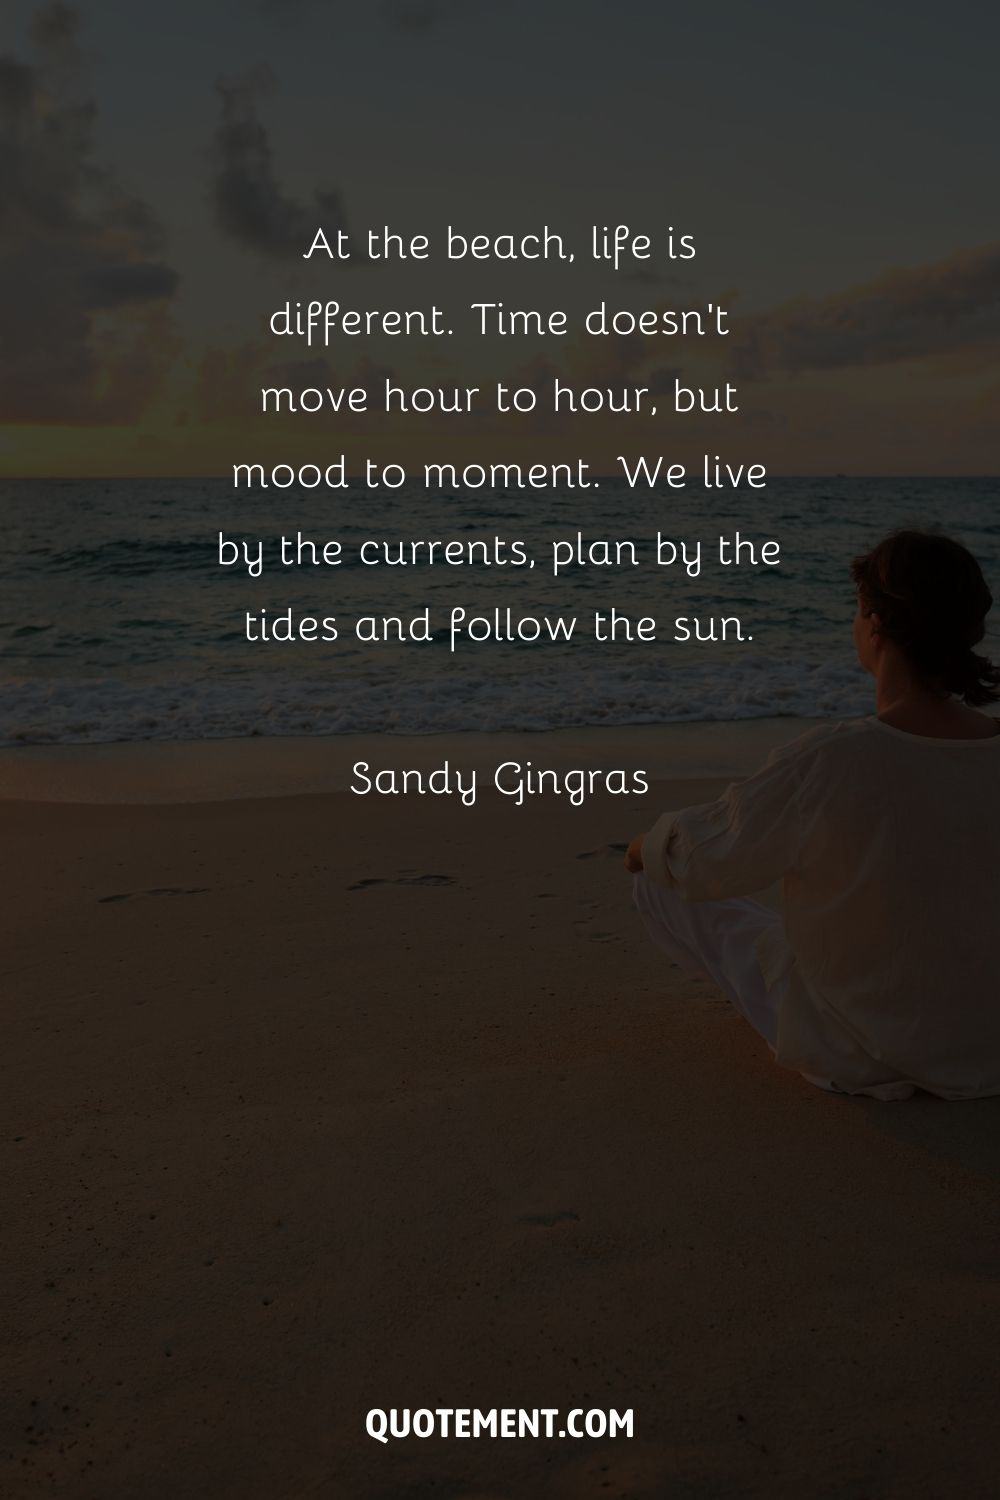 At the beach, life is different. Time doesn’t move hour to hour, but mood to moment. We live by the currents, plan by the tides and follow the sun. – Sandy Gingras